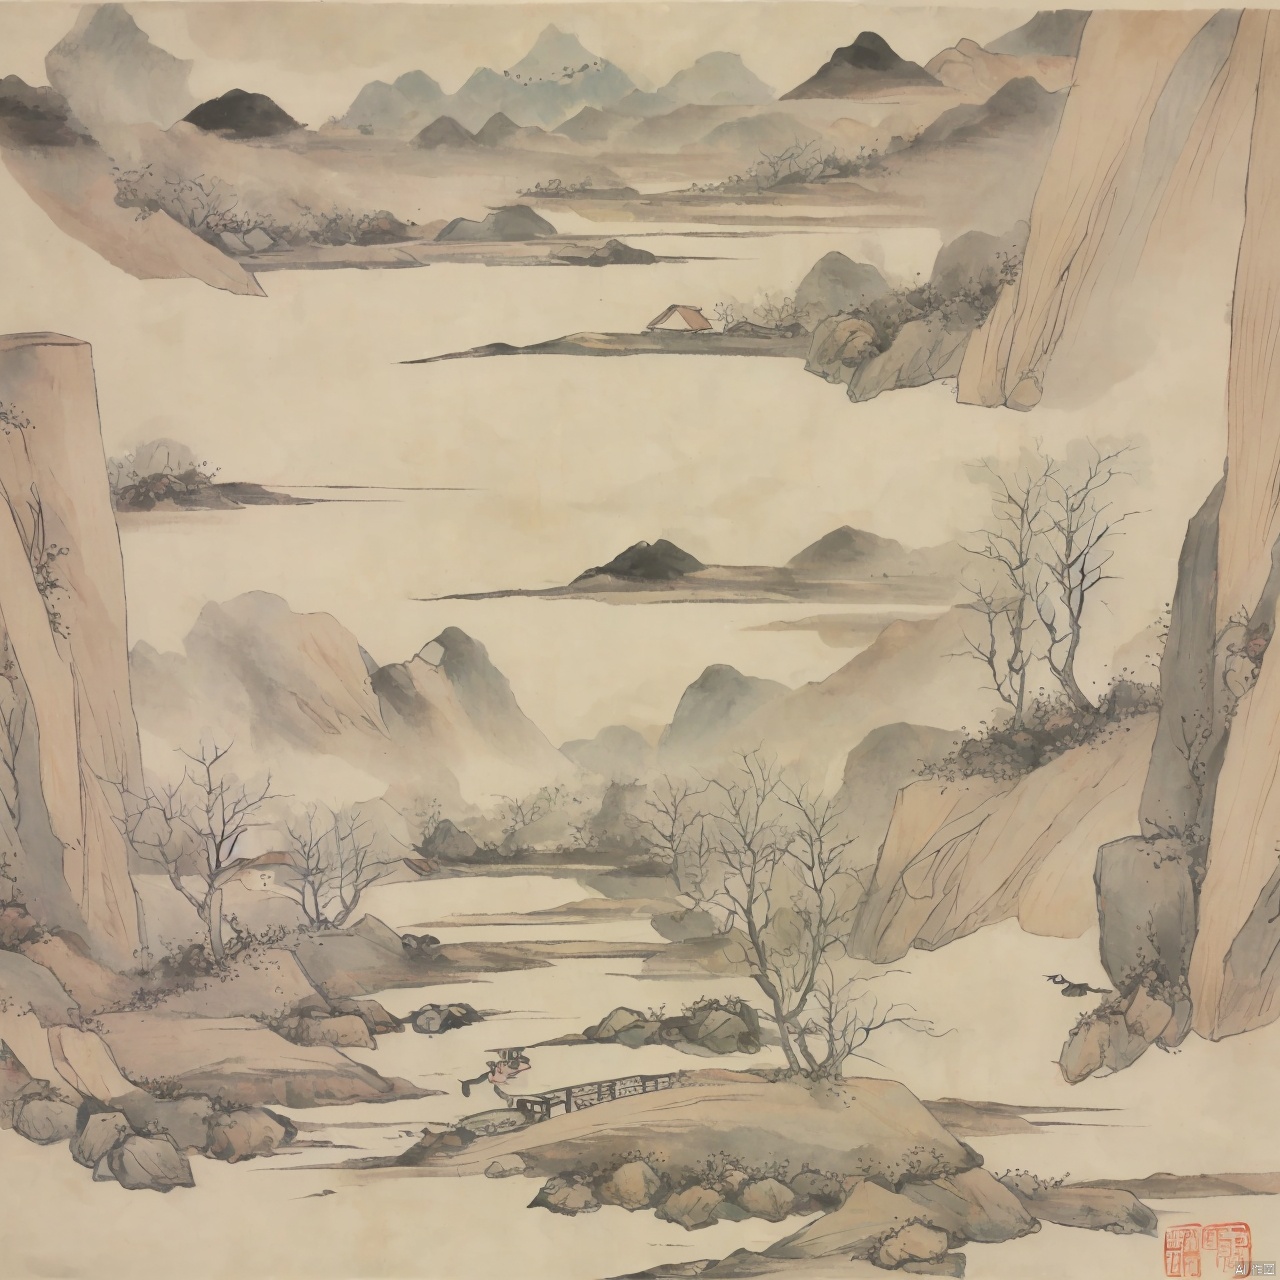  Chinese style ink landscape painting, trees, mountains, rivers, huts, boats